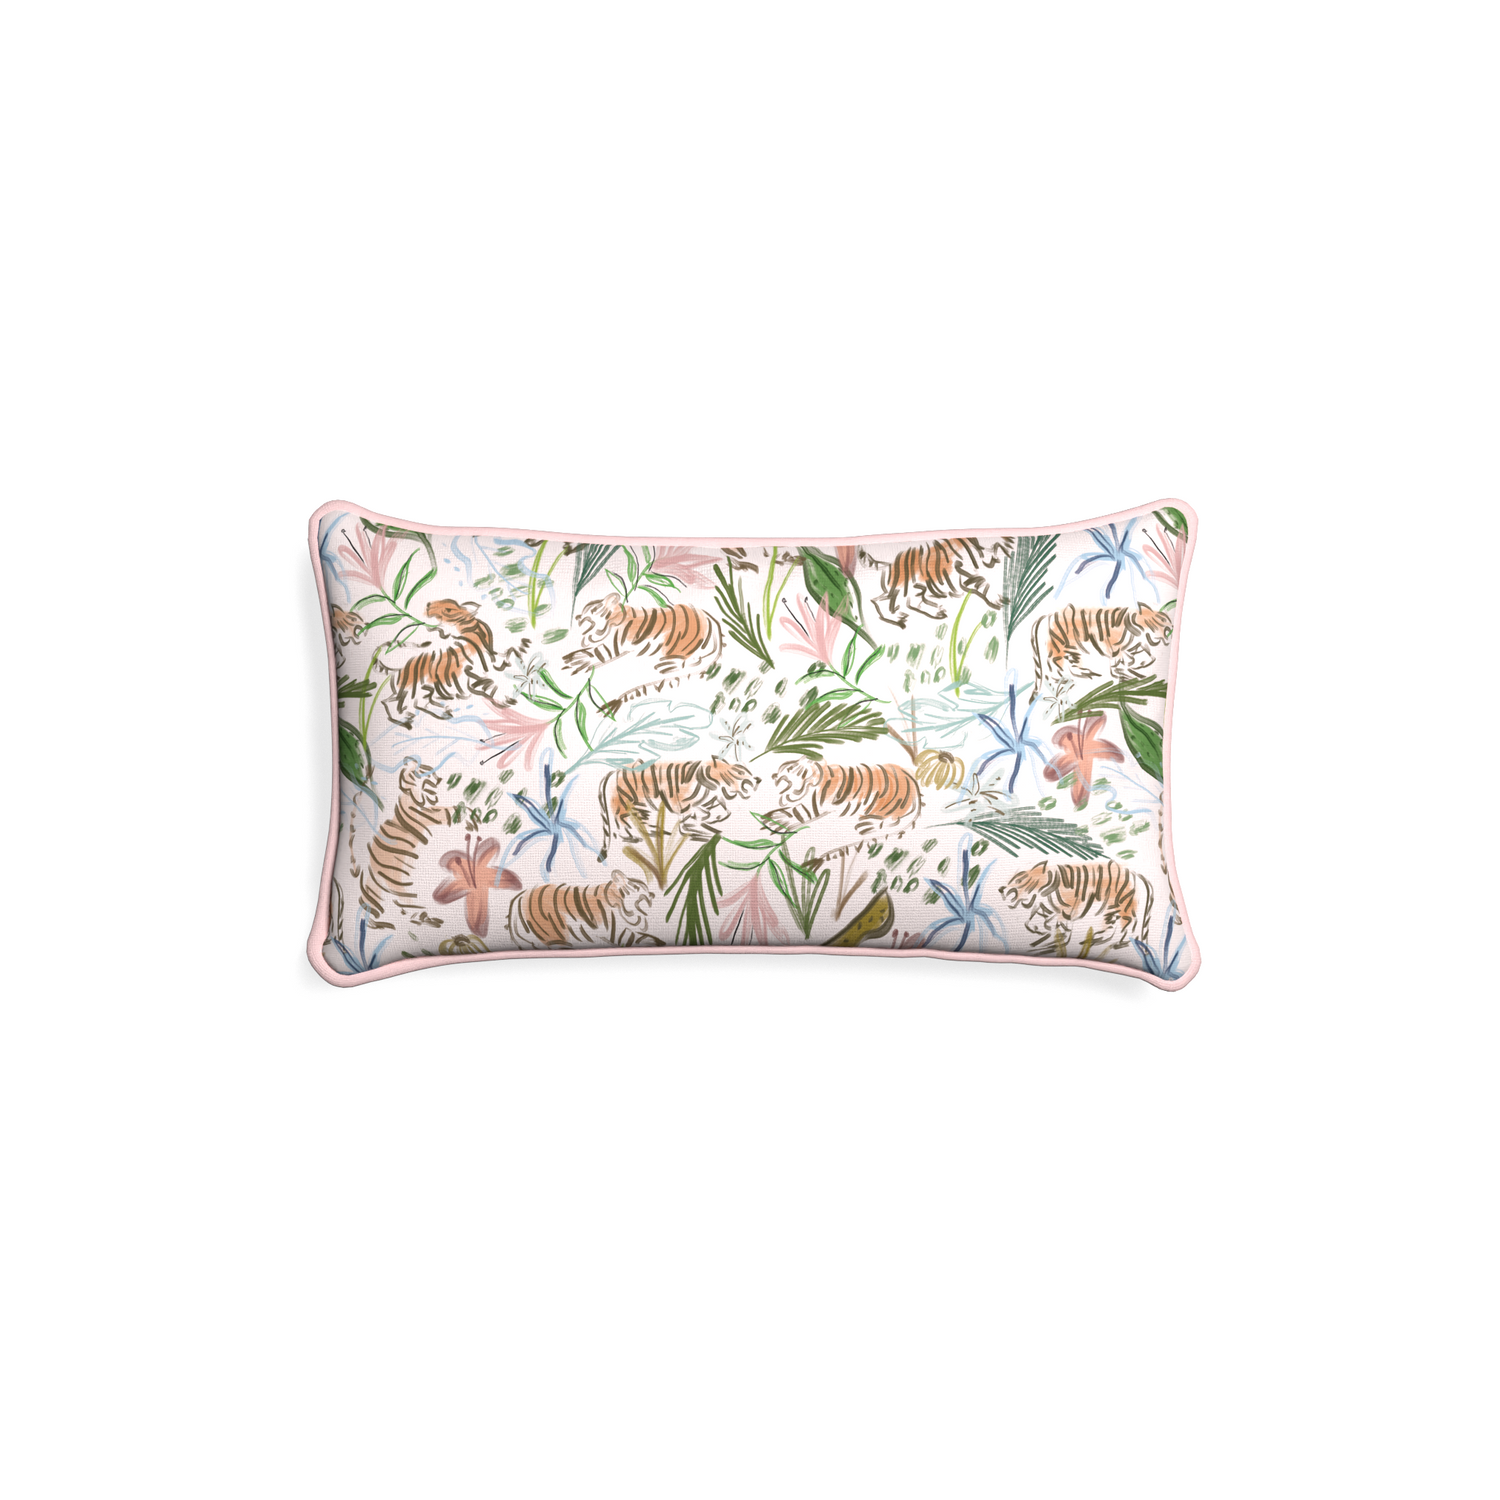 Petite-lumbar frida pink custom pink chinoiserie tigerpillow with petal piping on white background